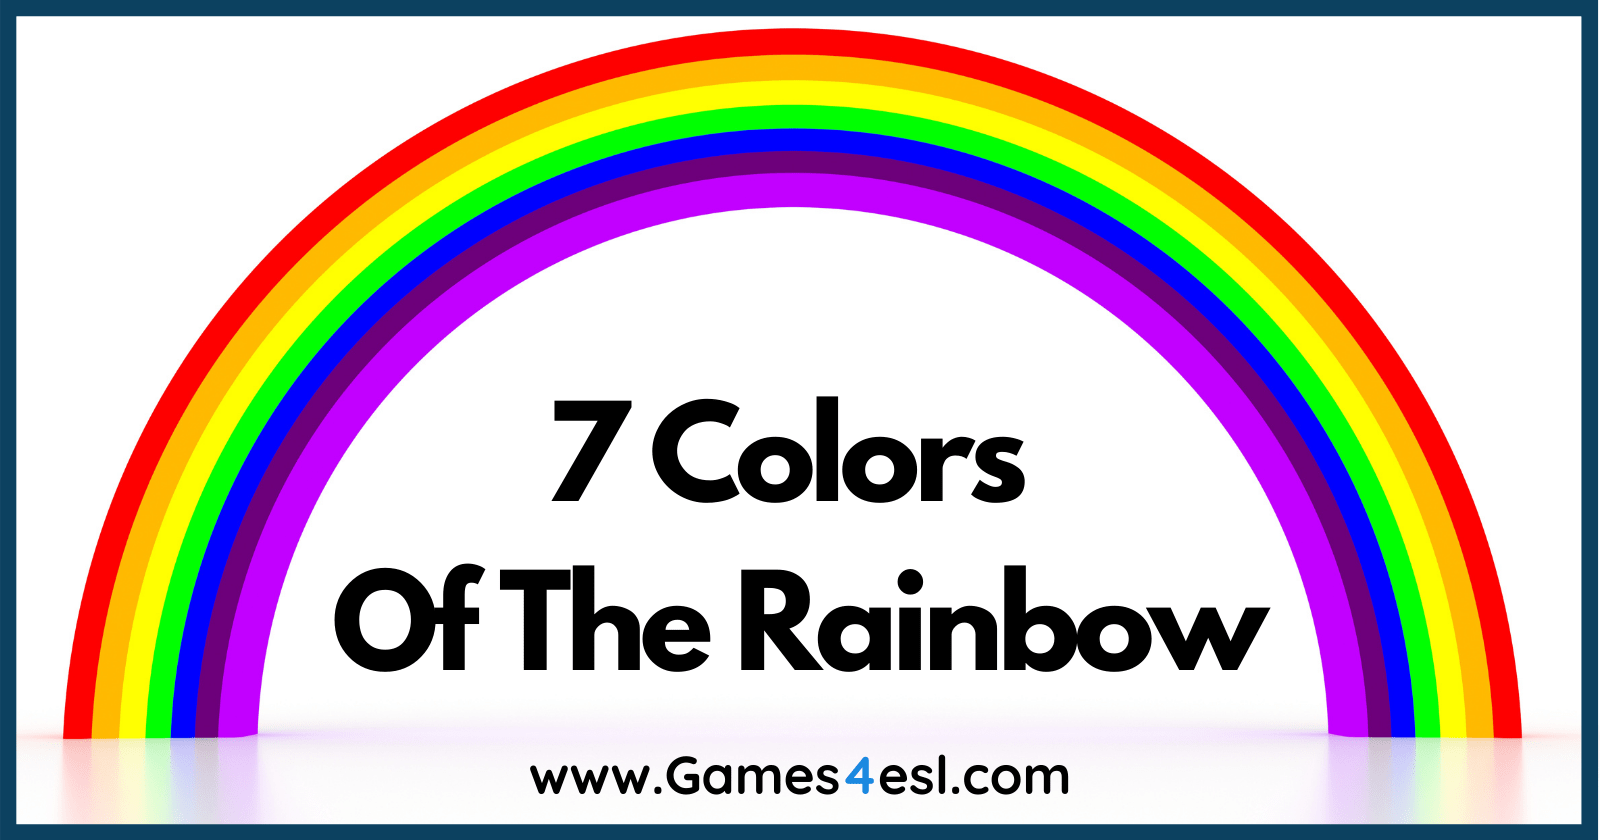 colors for kids rainbow